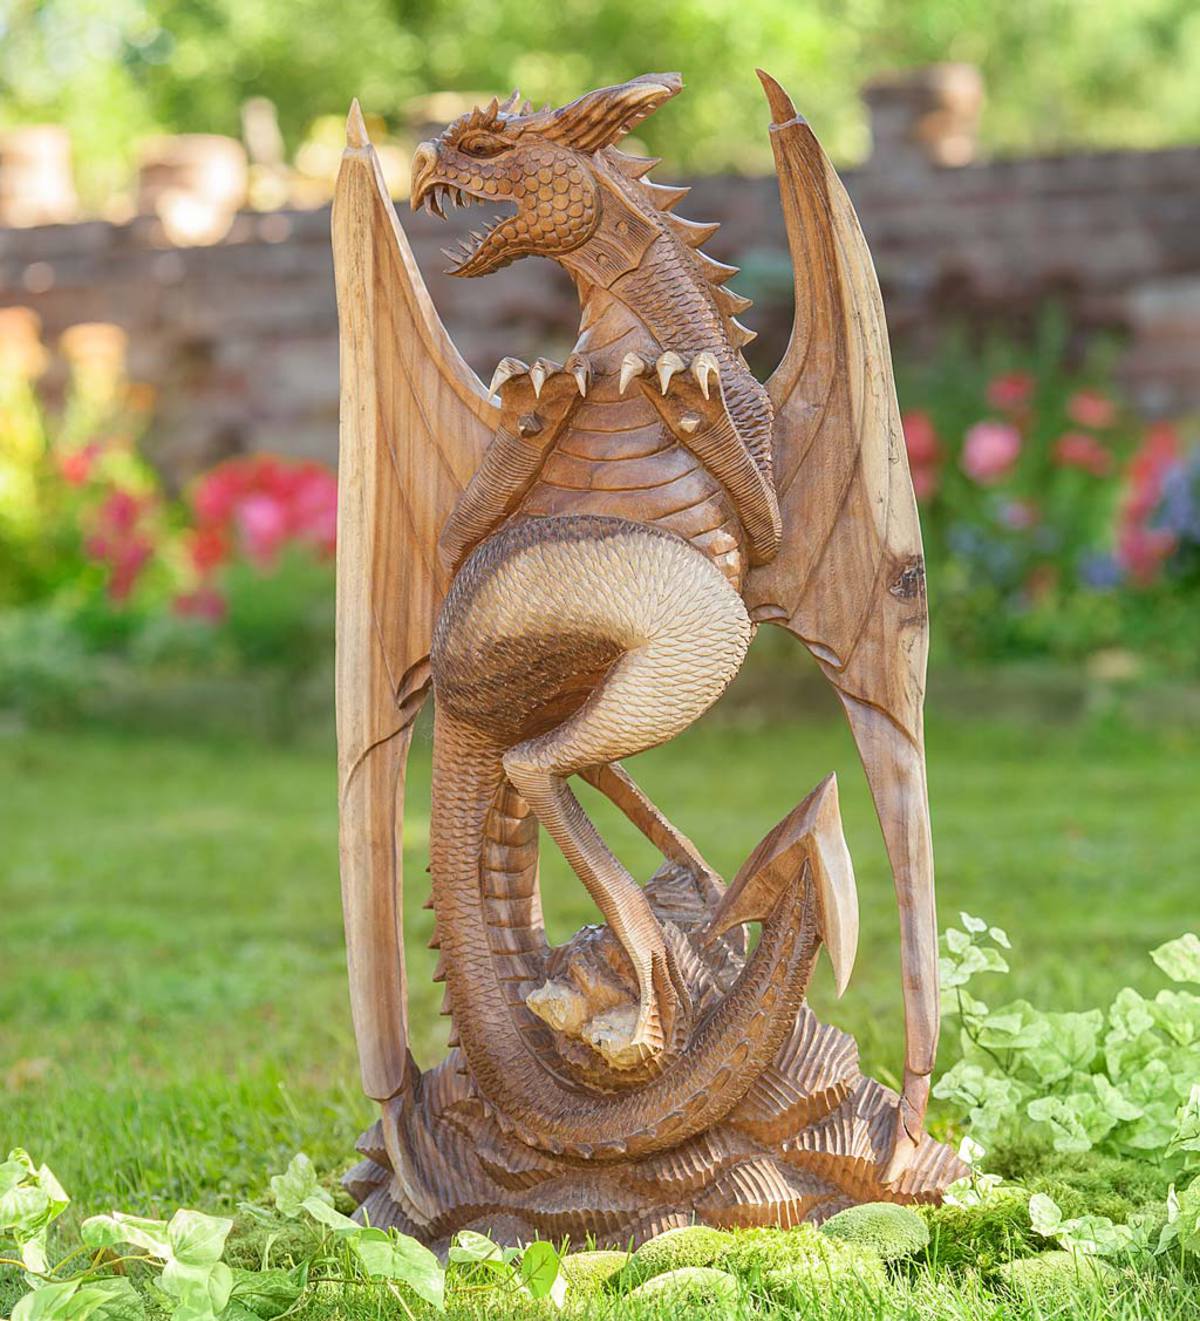 Large Hand-Carved Wooden Dragon